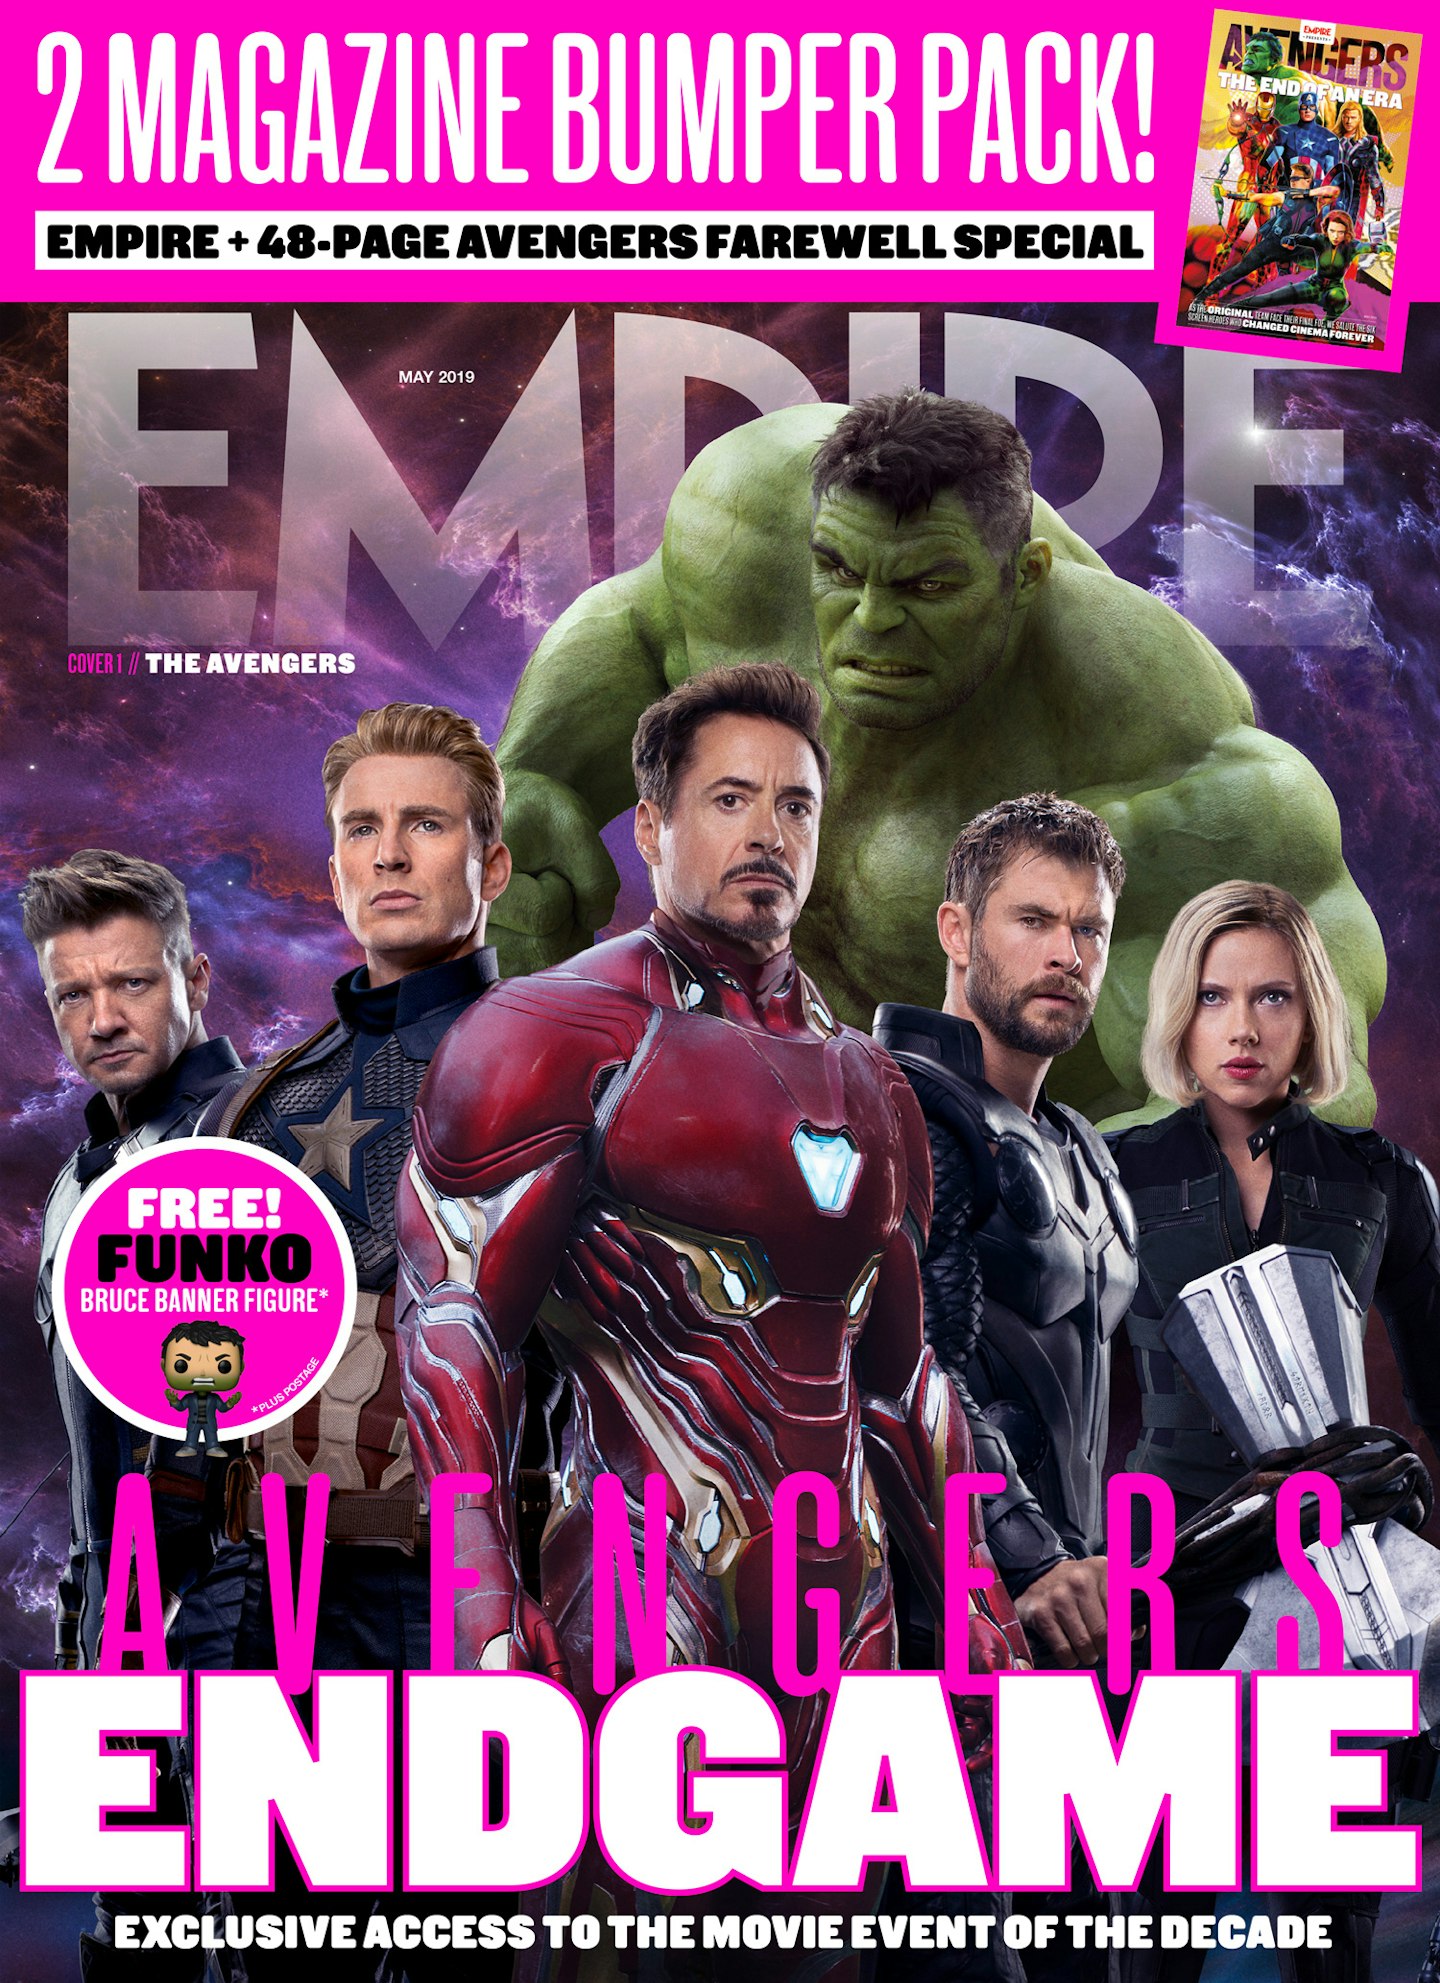 Empire - May 2019 - Avengers Endgame covers